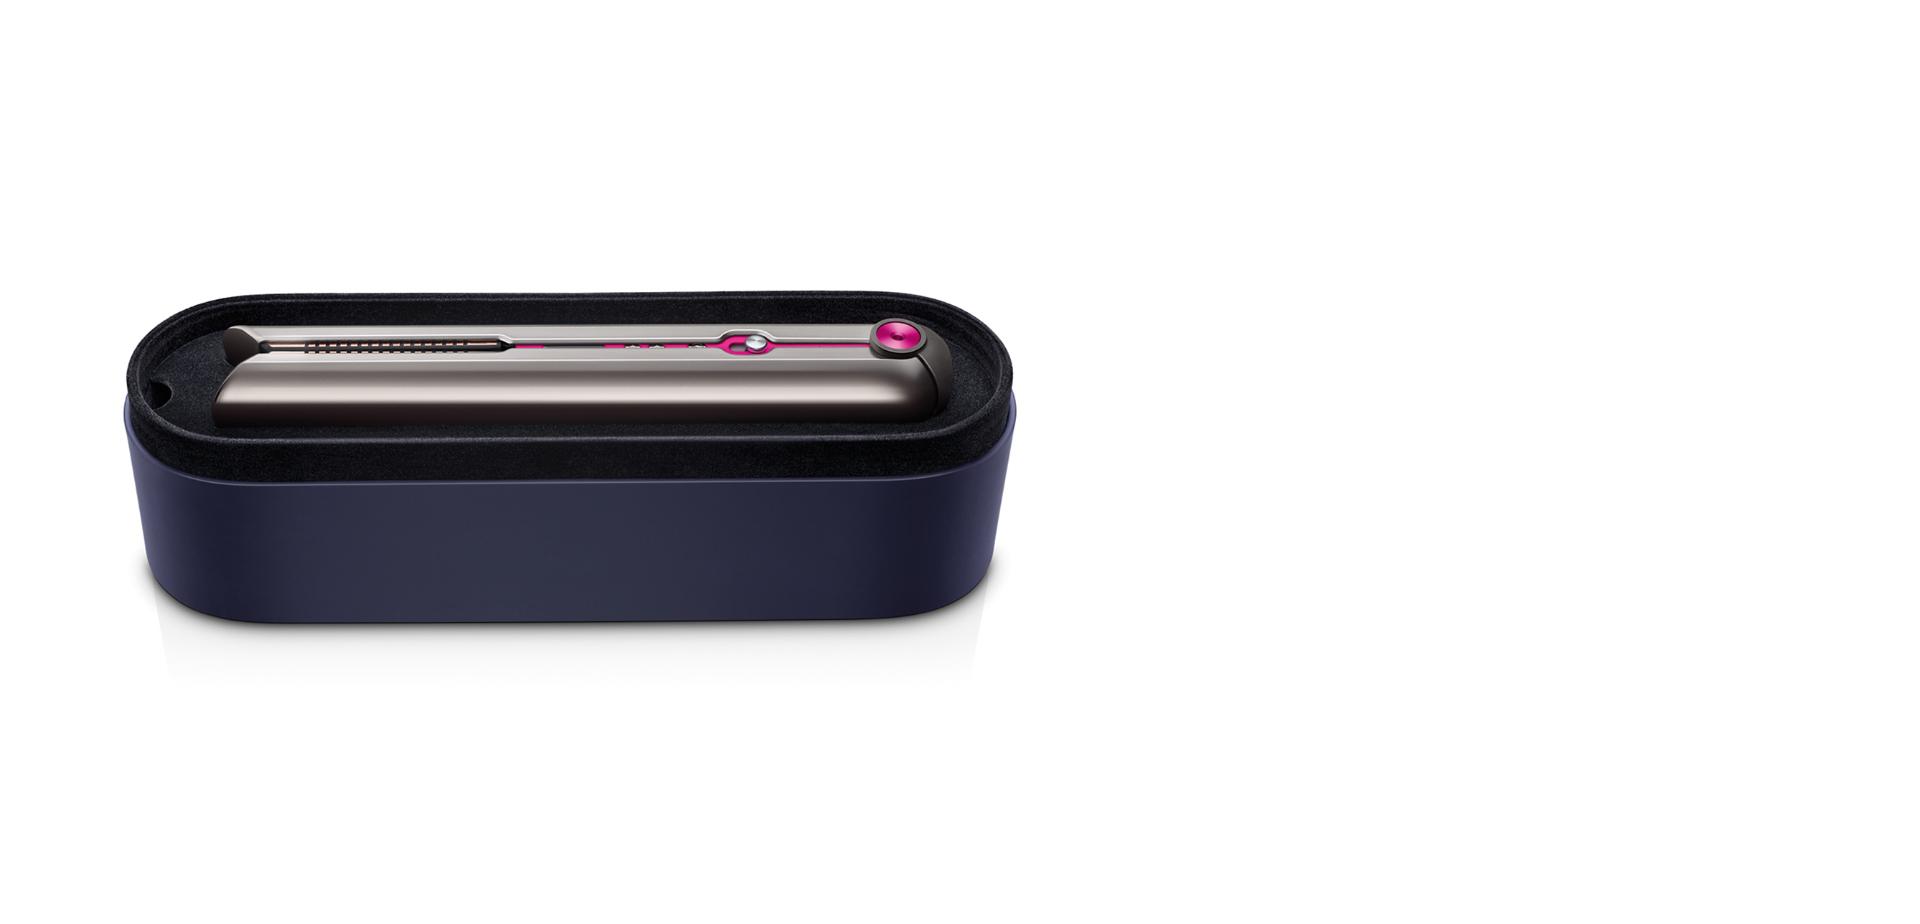 An open Dyson-designed presentation case containing the Dyson Corrale straightener